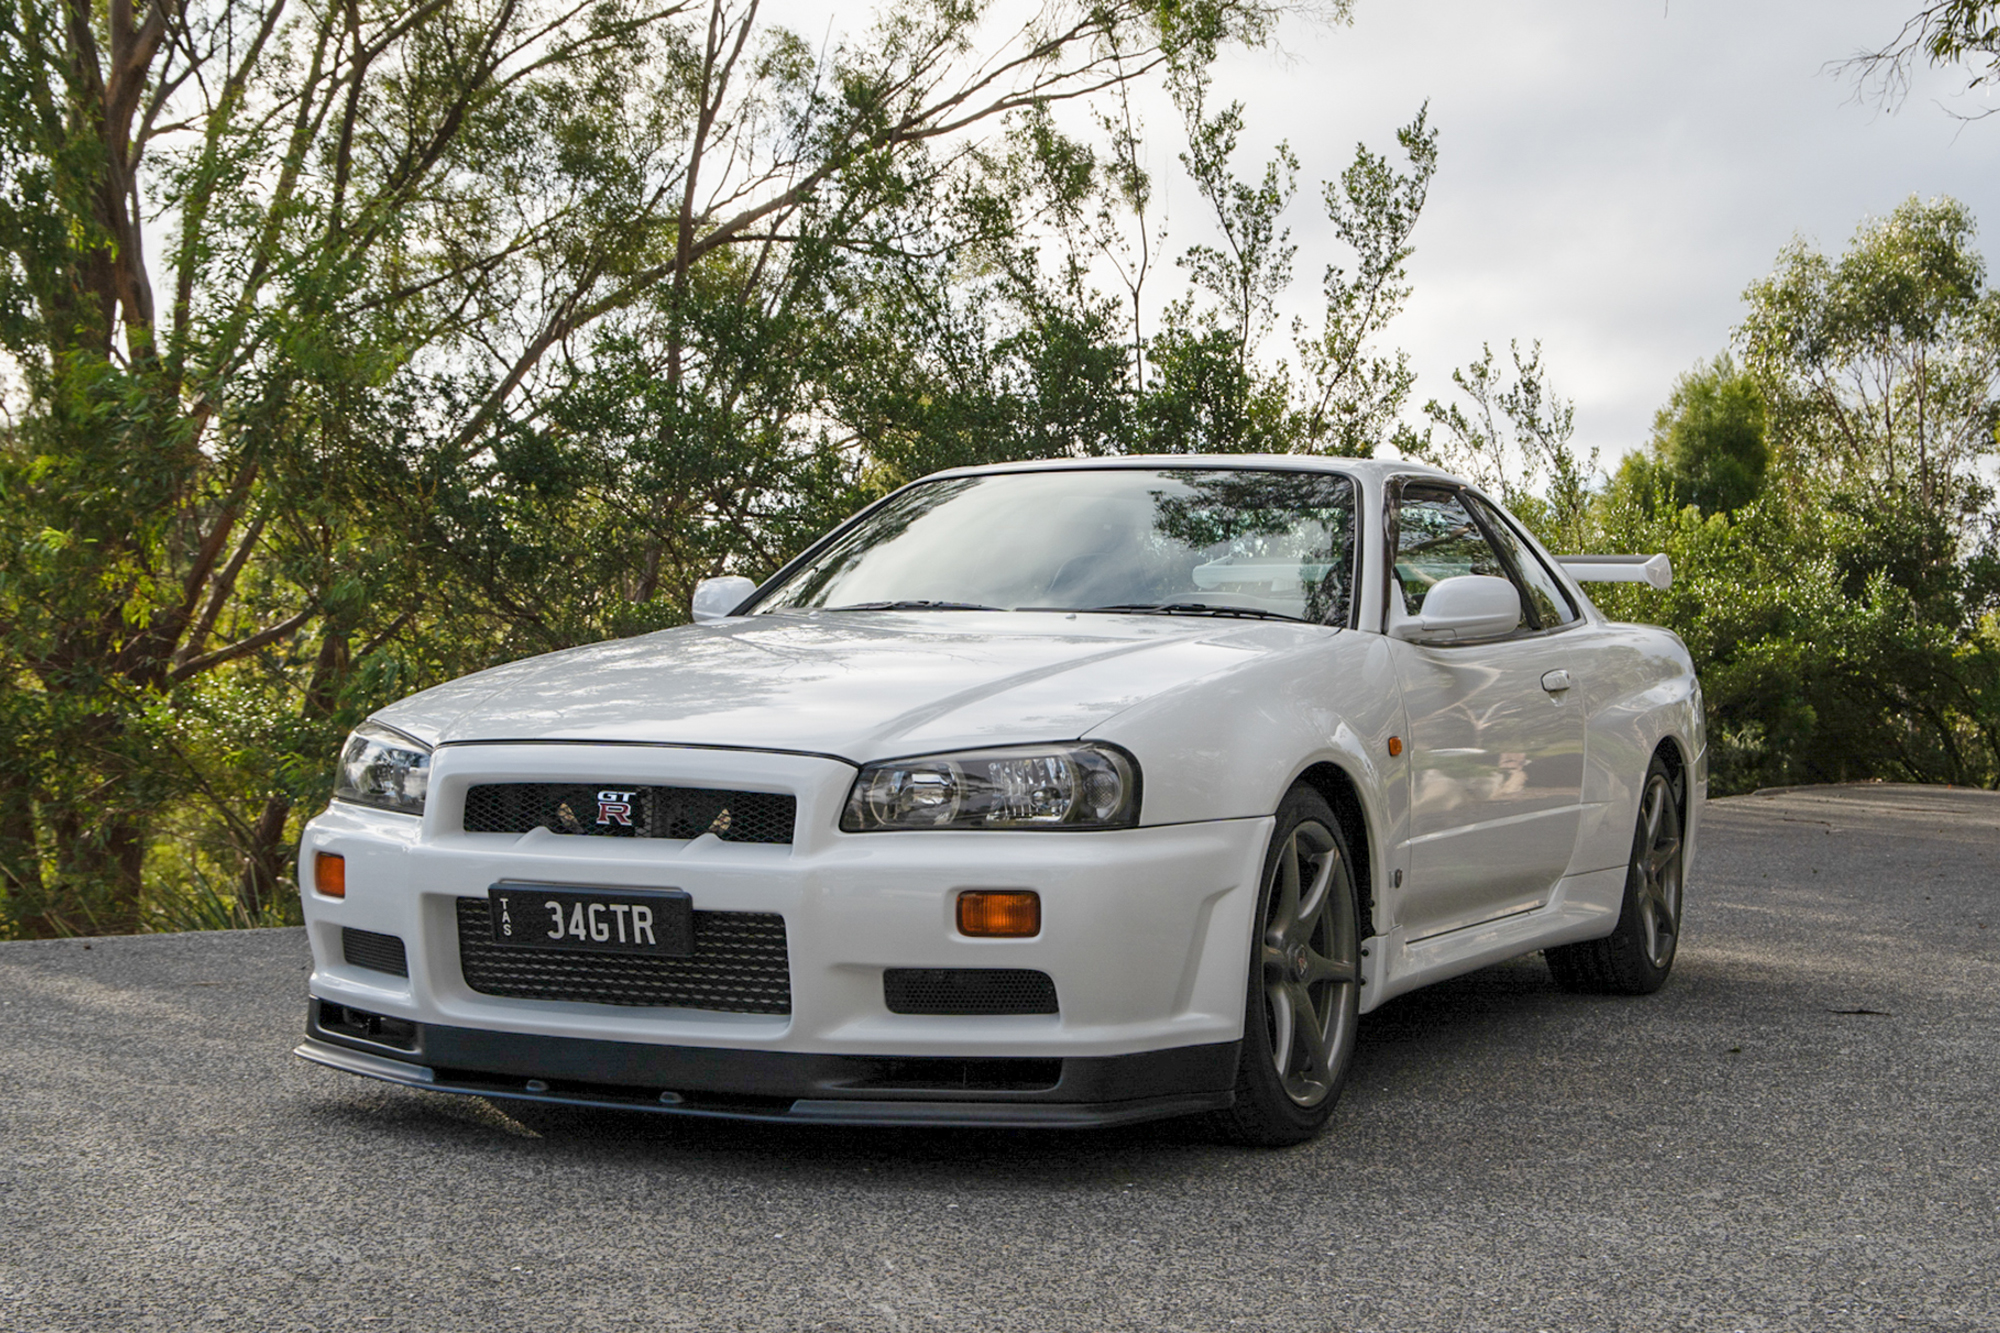 1999 NISSAN SKYLINE (R34) GT-R V-SPEC for sale by auction in